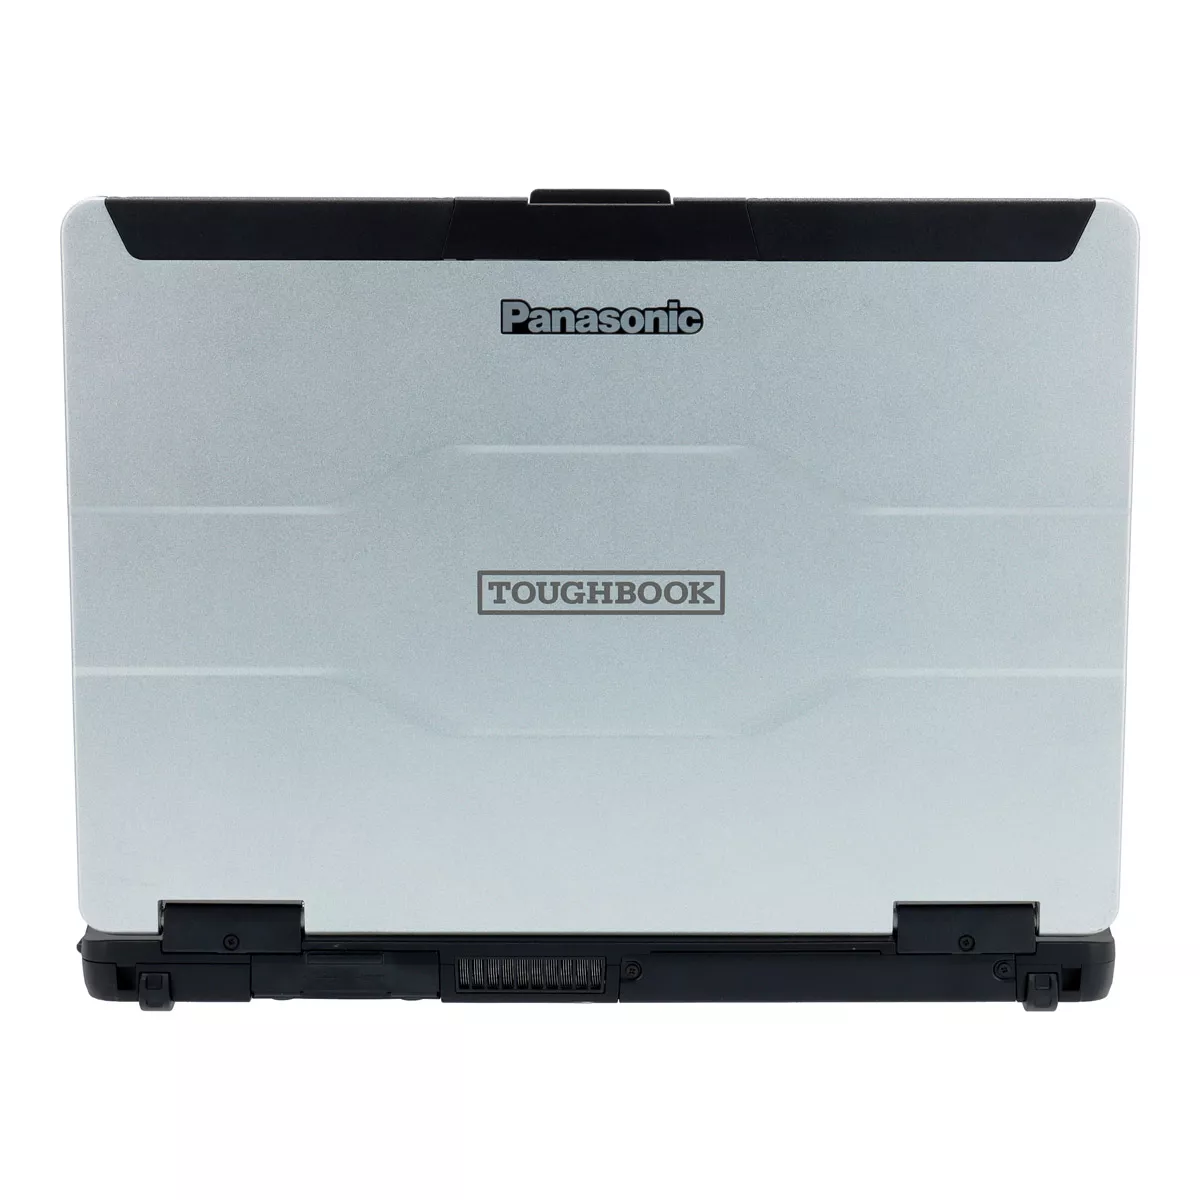 Outdoor Notebook Panasonic Toughbook FZ-55 Core i5 8365U Full-HD 240 GB M.2 SSD Webcam Touch US-Layout A+